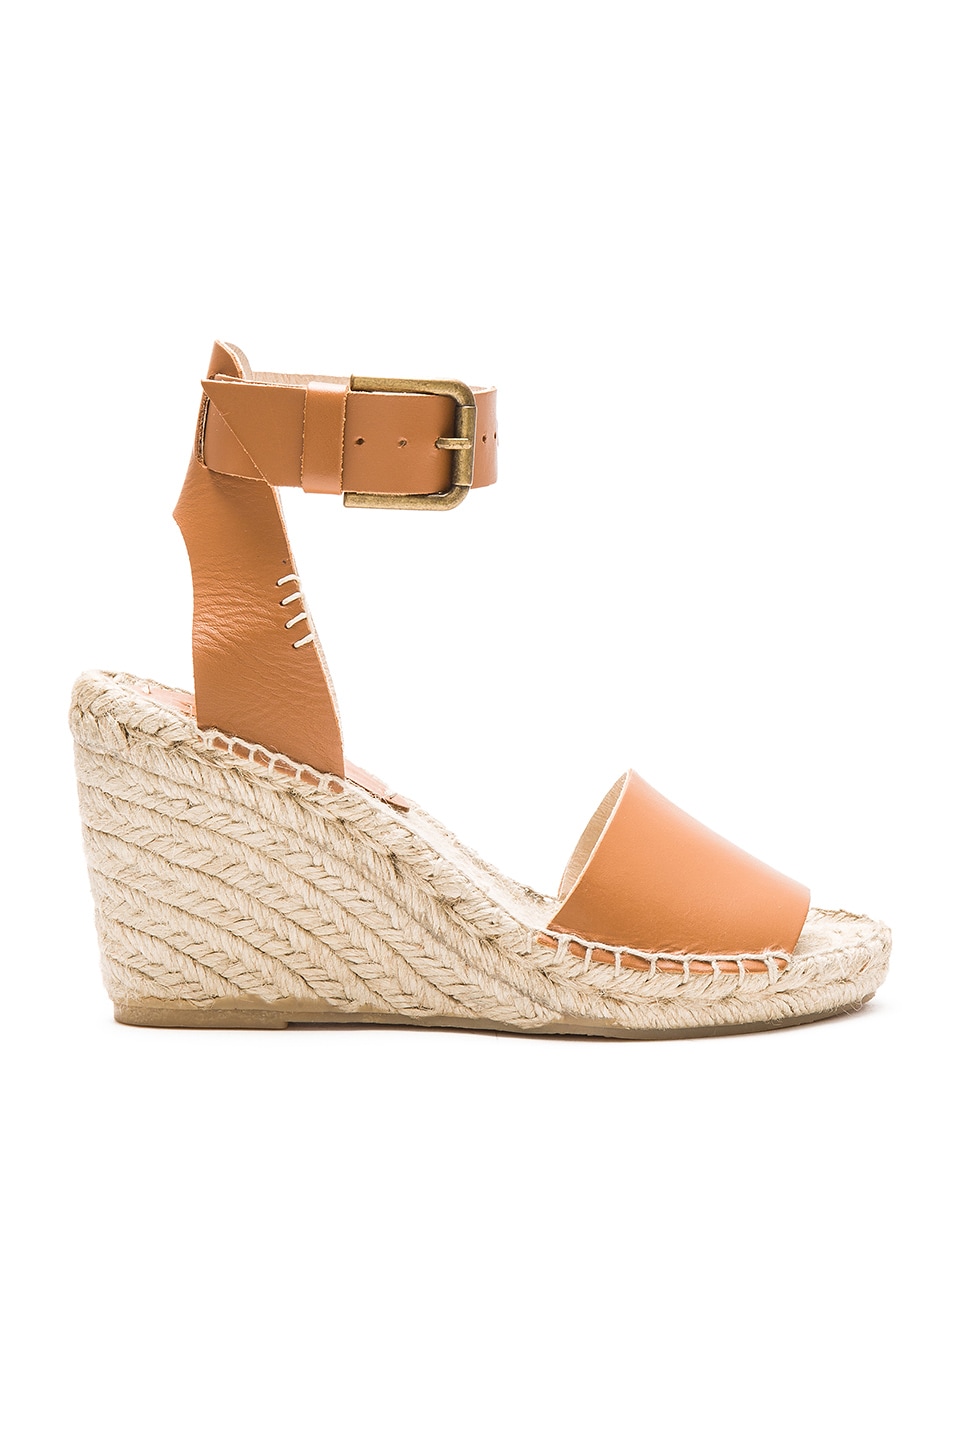 Soludos Open Toe Wedge Leather in Tan | REVOLVE